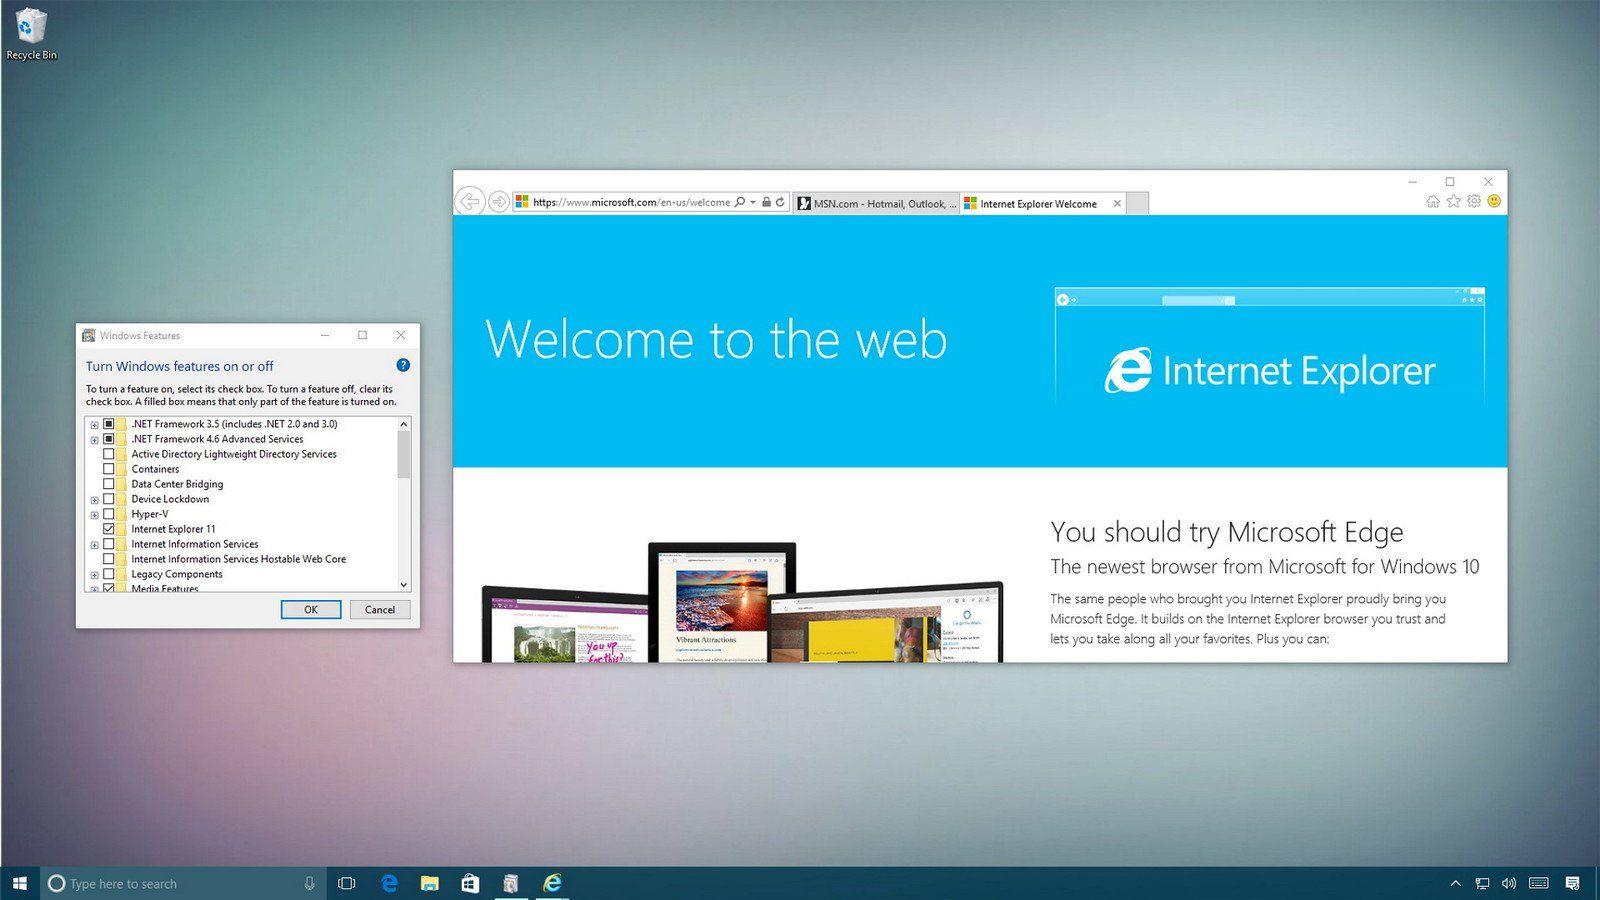 Old Microsoft Edge Logo - How to remove Internet Explorer (IE) from Windows 10 | Windows Central